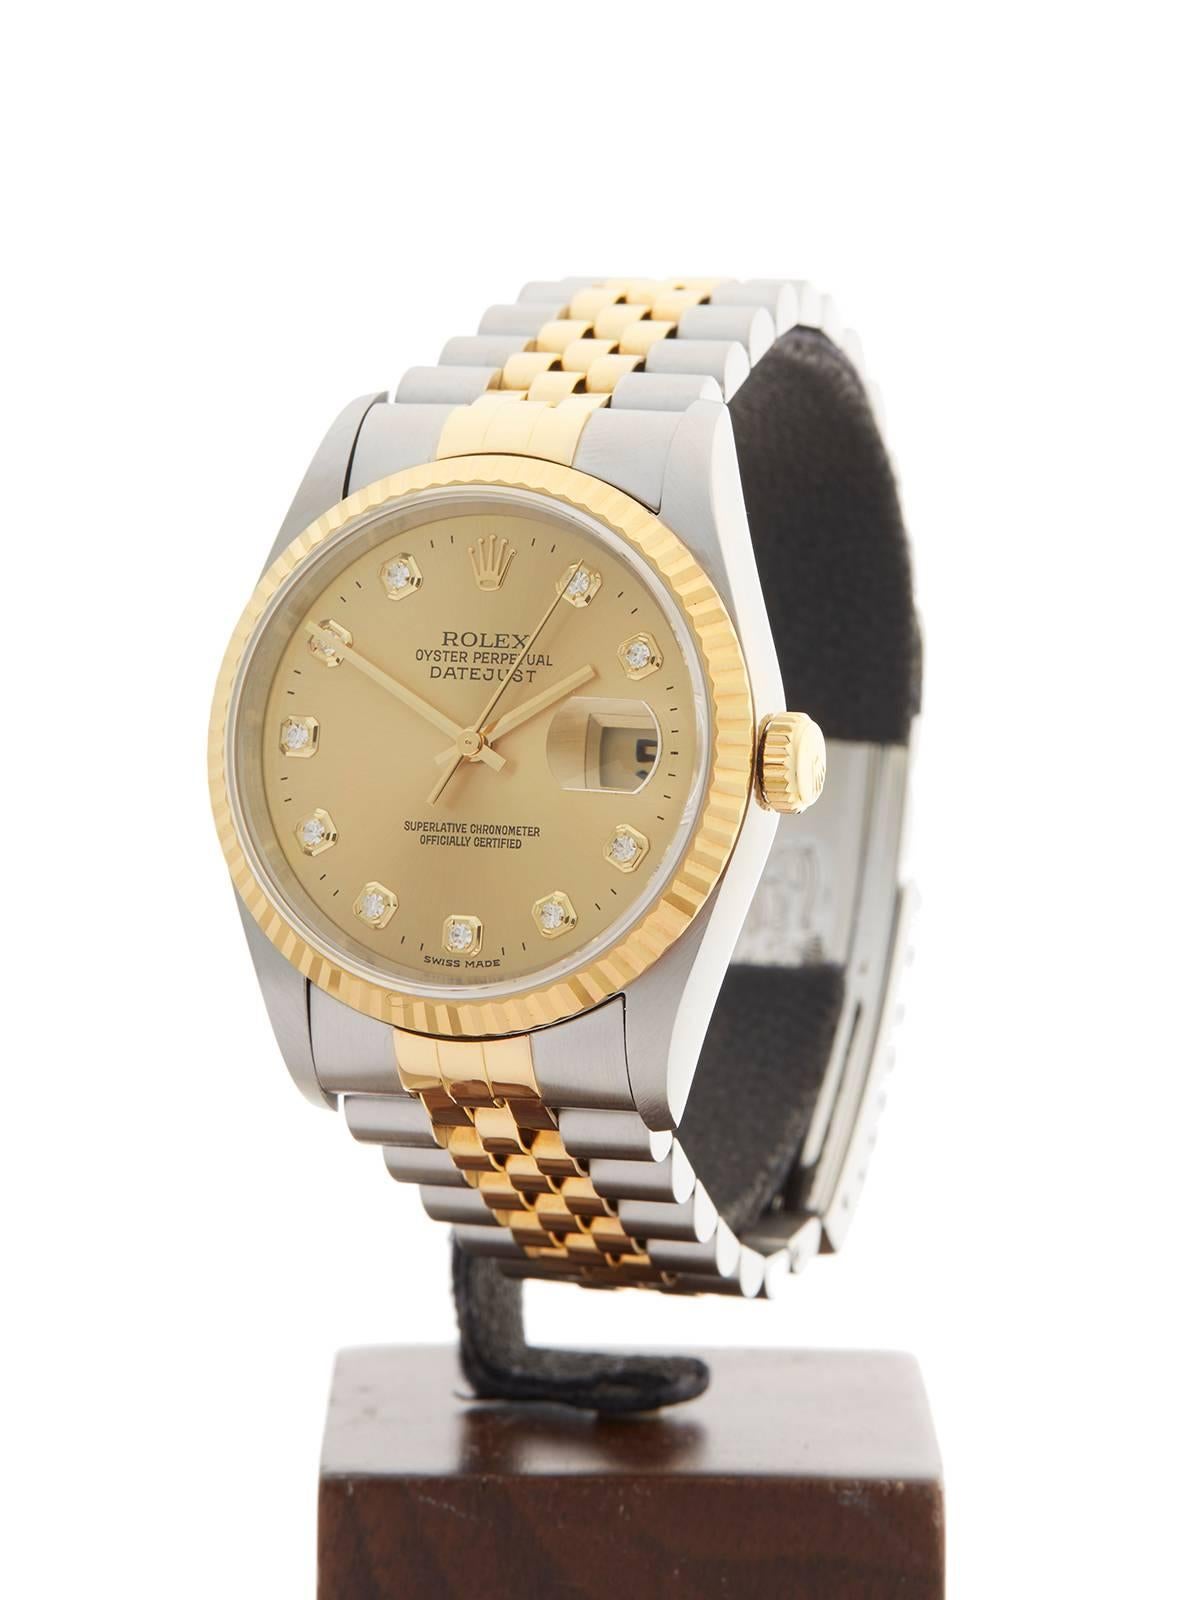 Ref: W3589
Model: 16233
Serial: T37****
Condition: 9 - Excellent condition
Age:	1st November 1998
Case Diameter: 36 mm
Case Size: 36mm
Box and Papers: Box, Manuals and Guarantee 
Movement: Automatic
Case: Stainless Steel/18k Yellow Gold
Dial: